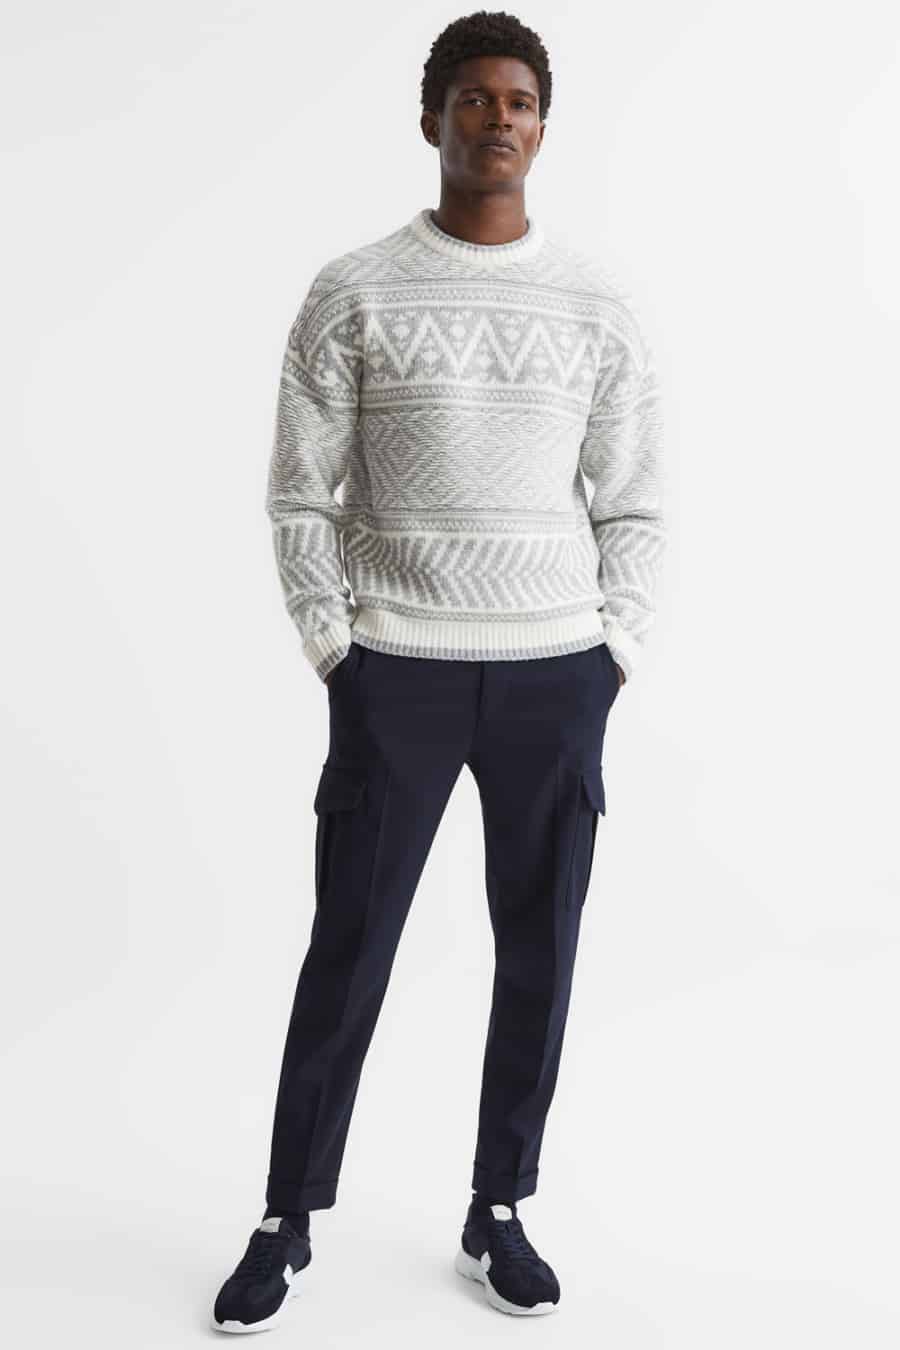 Men's navy cargo pants, fair isle sweater and suede sneakers outfit